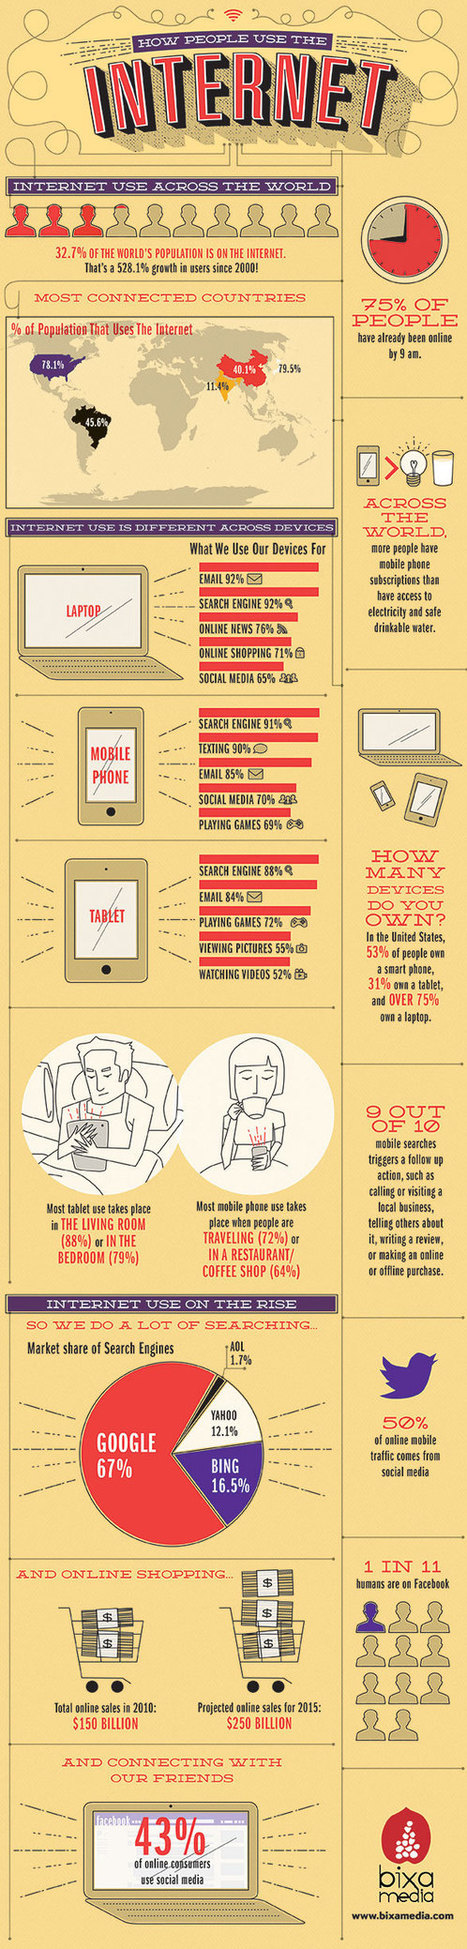 How People Use the Internet [INFOGRAPHIC] | :: The 4th Era :: | Scoop.it